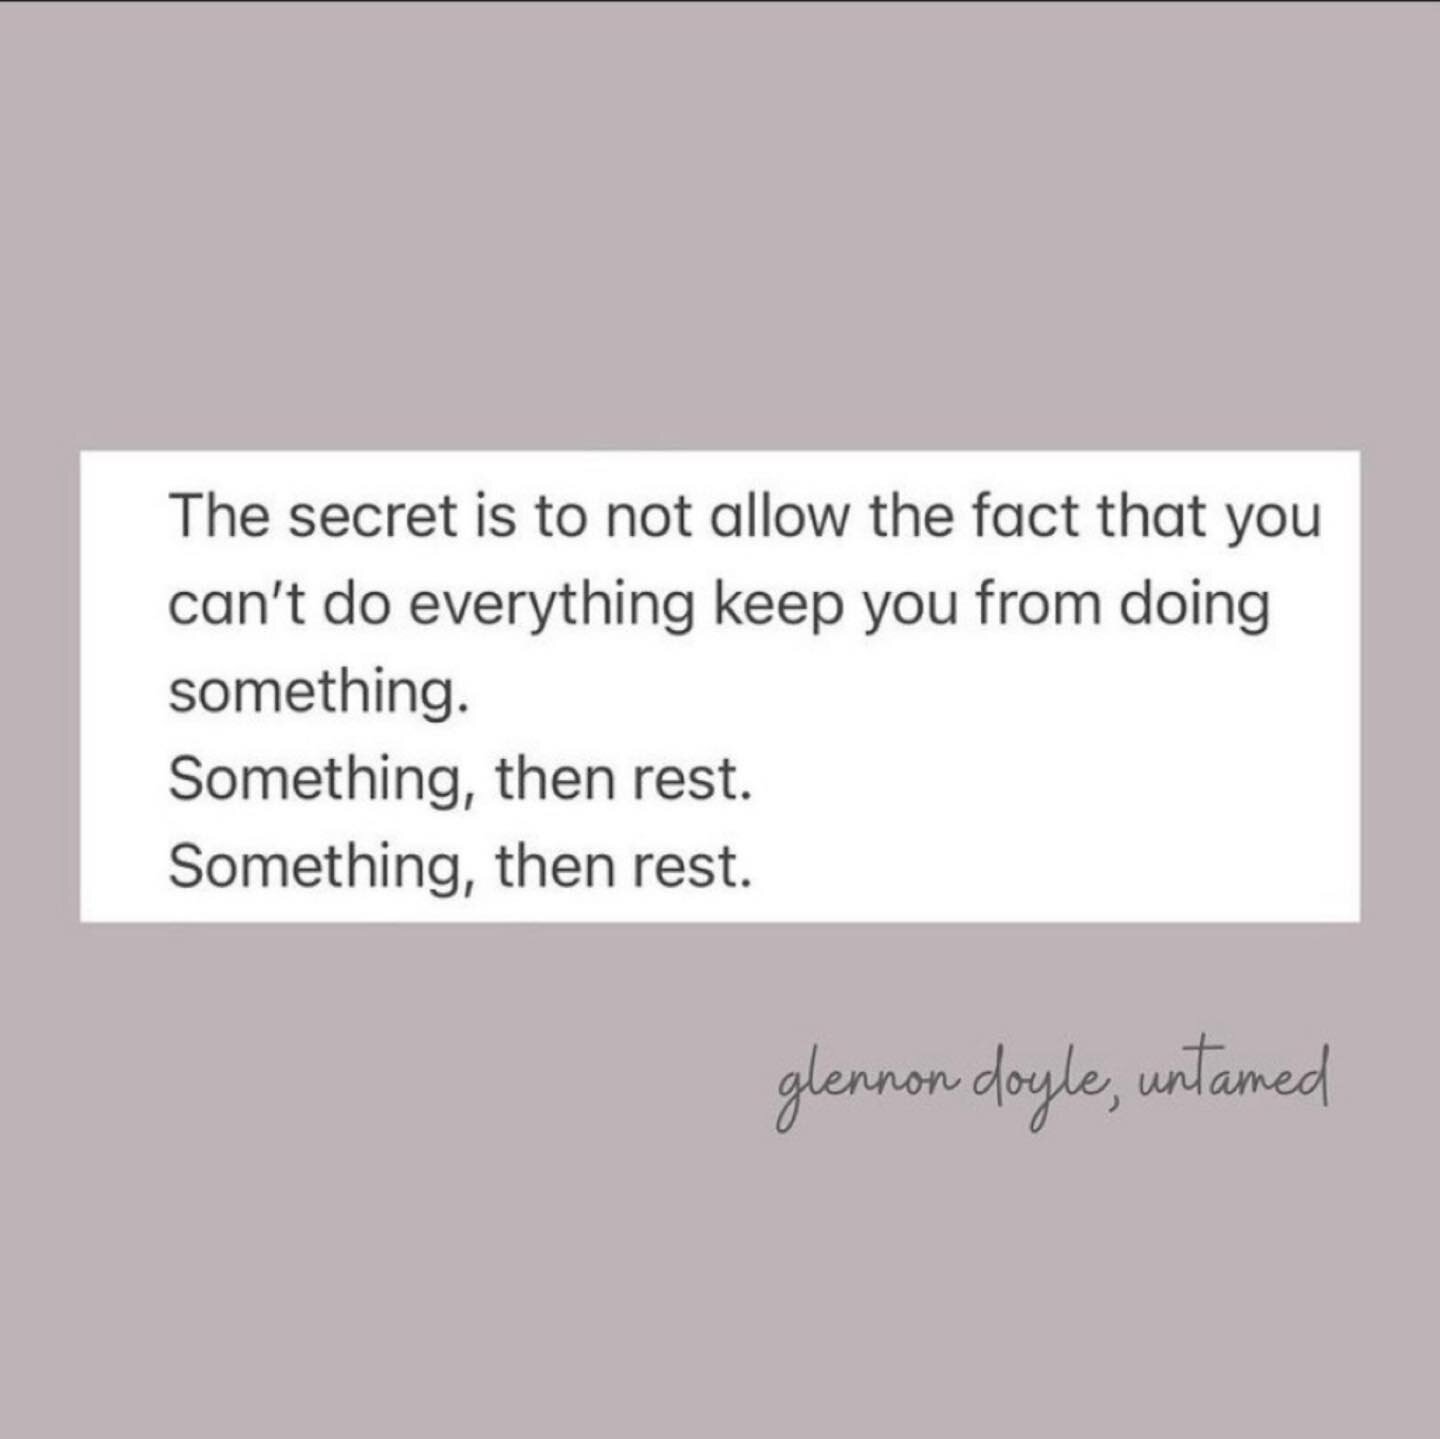 Something, then rest.